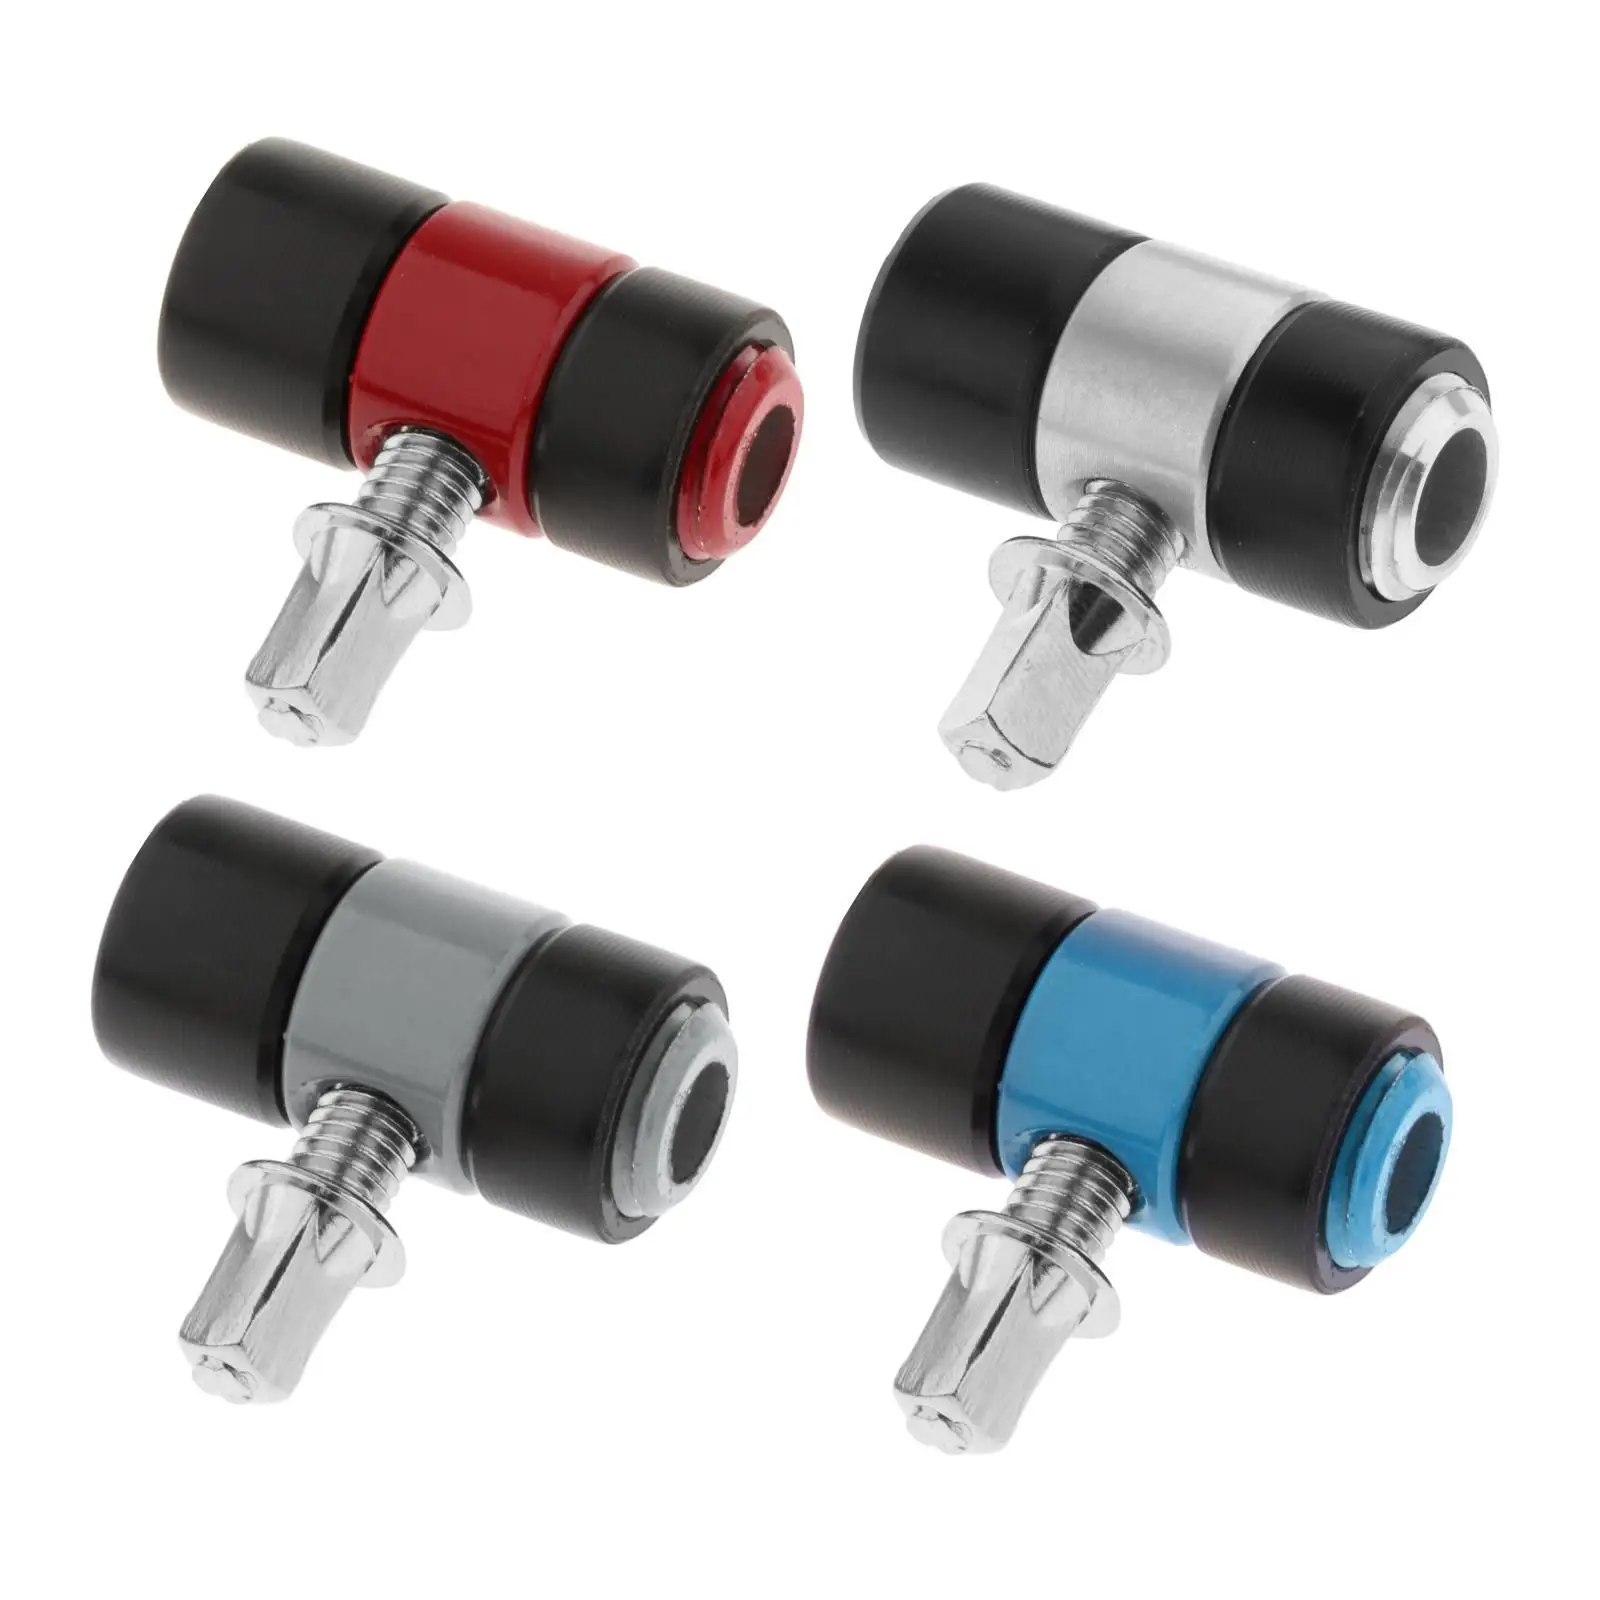 Removable Counterweight Fittings Easy to Install DIY Bearing Durable Hammer Head